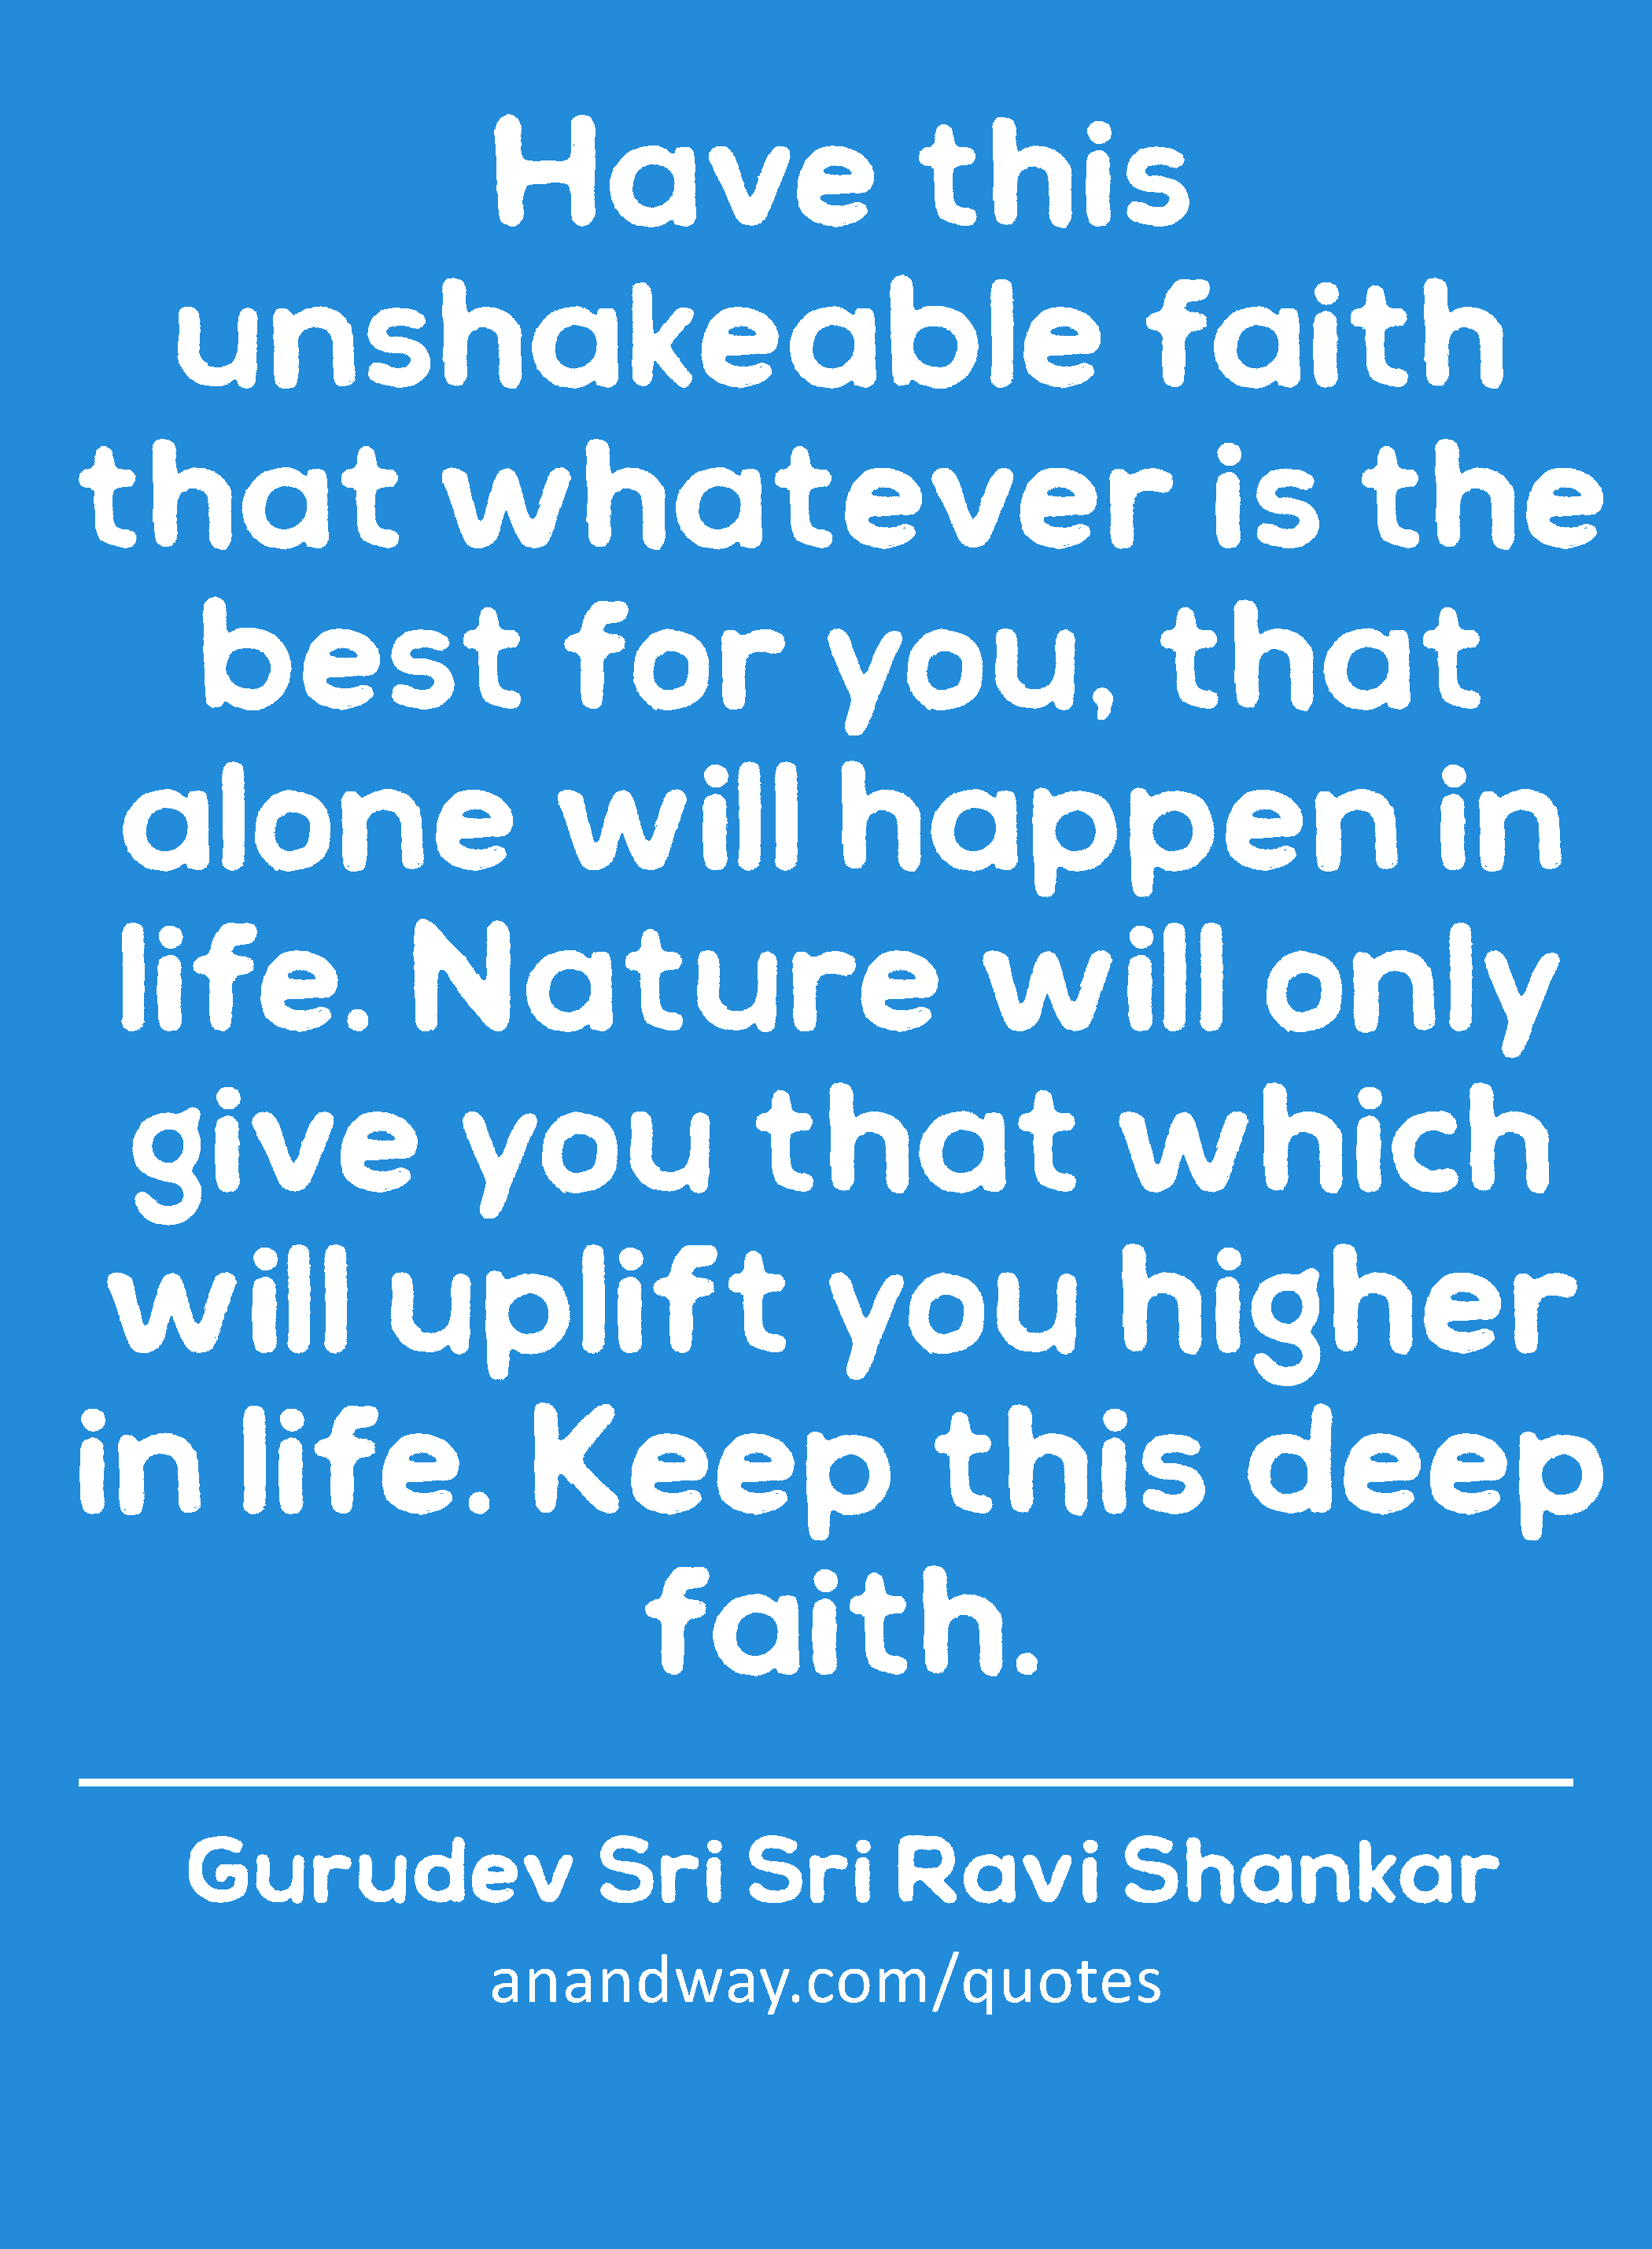 Have this unshakeable faith that whatever is the best for you, that alone will happen in life.
 -Gurudev Sri Sri Ravi Shankar